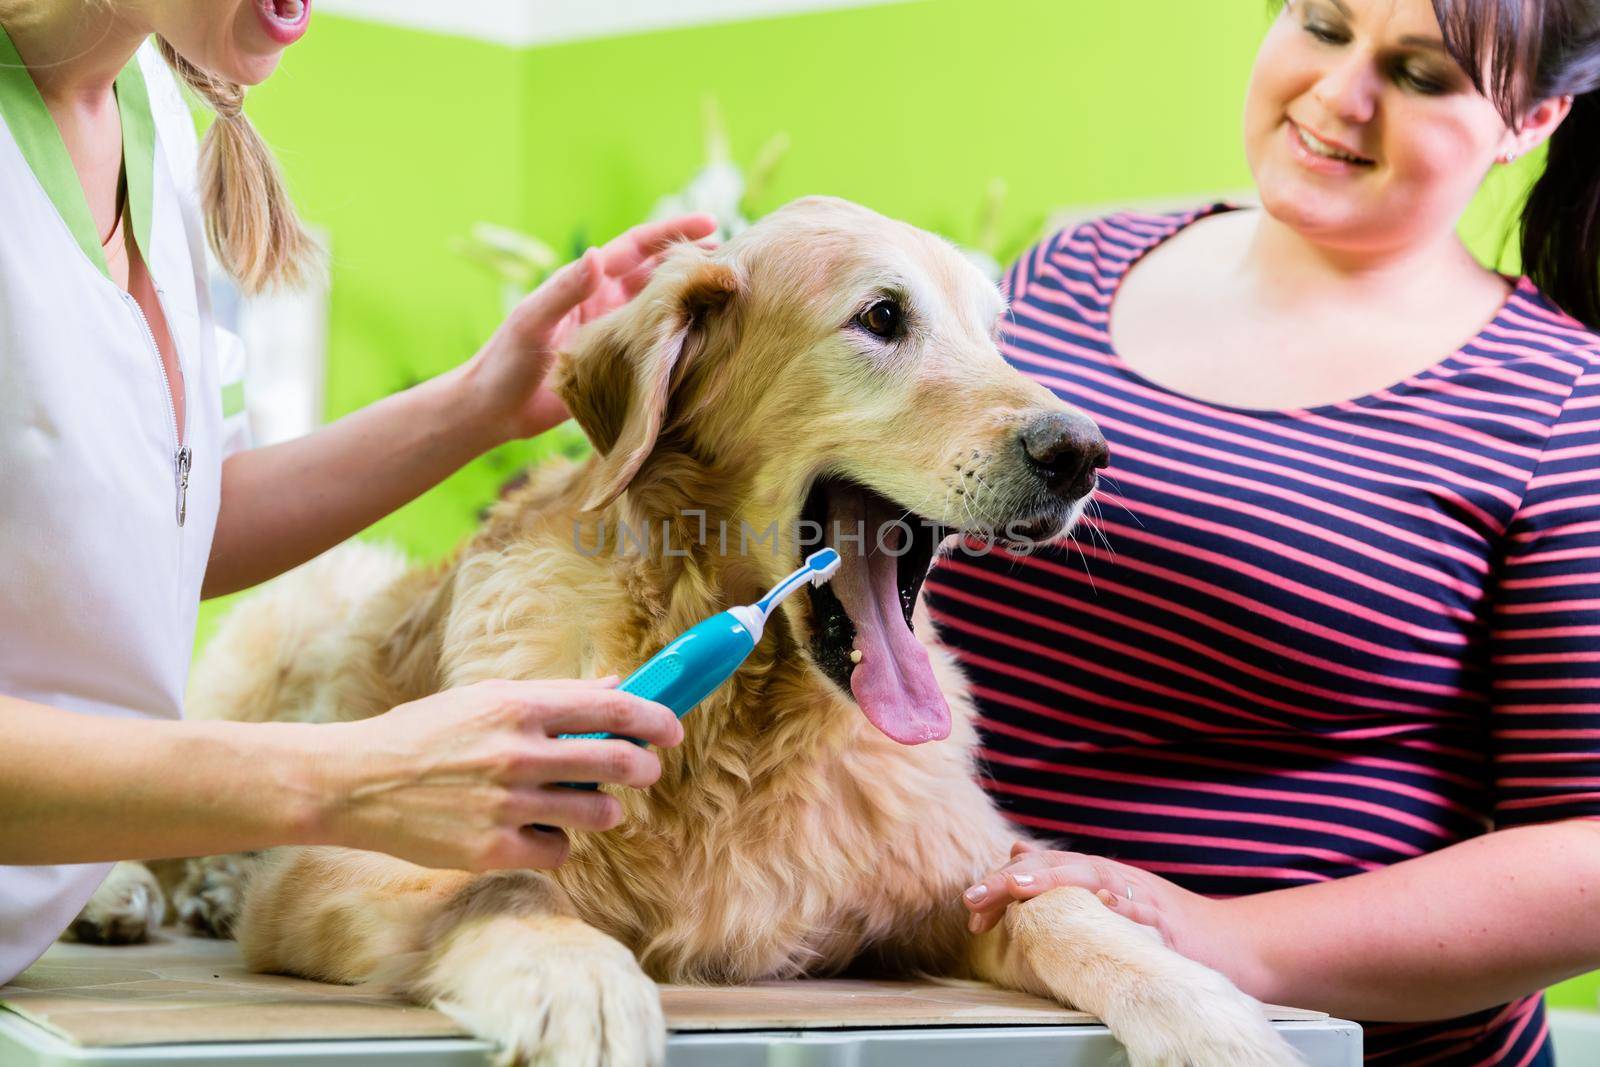 Big dog getting dental care by woman at dog parlor by Kzenon